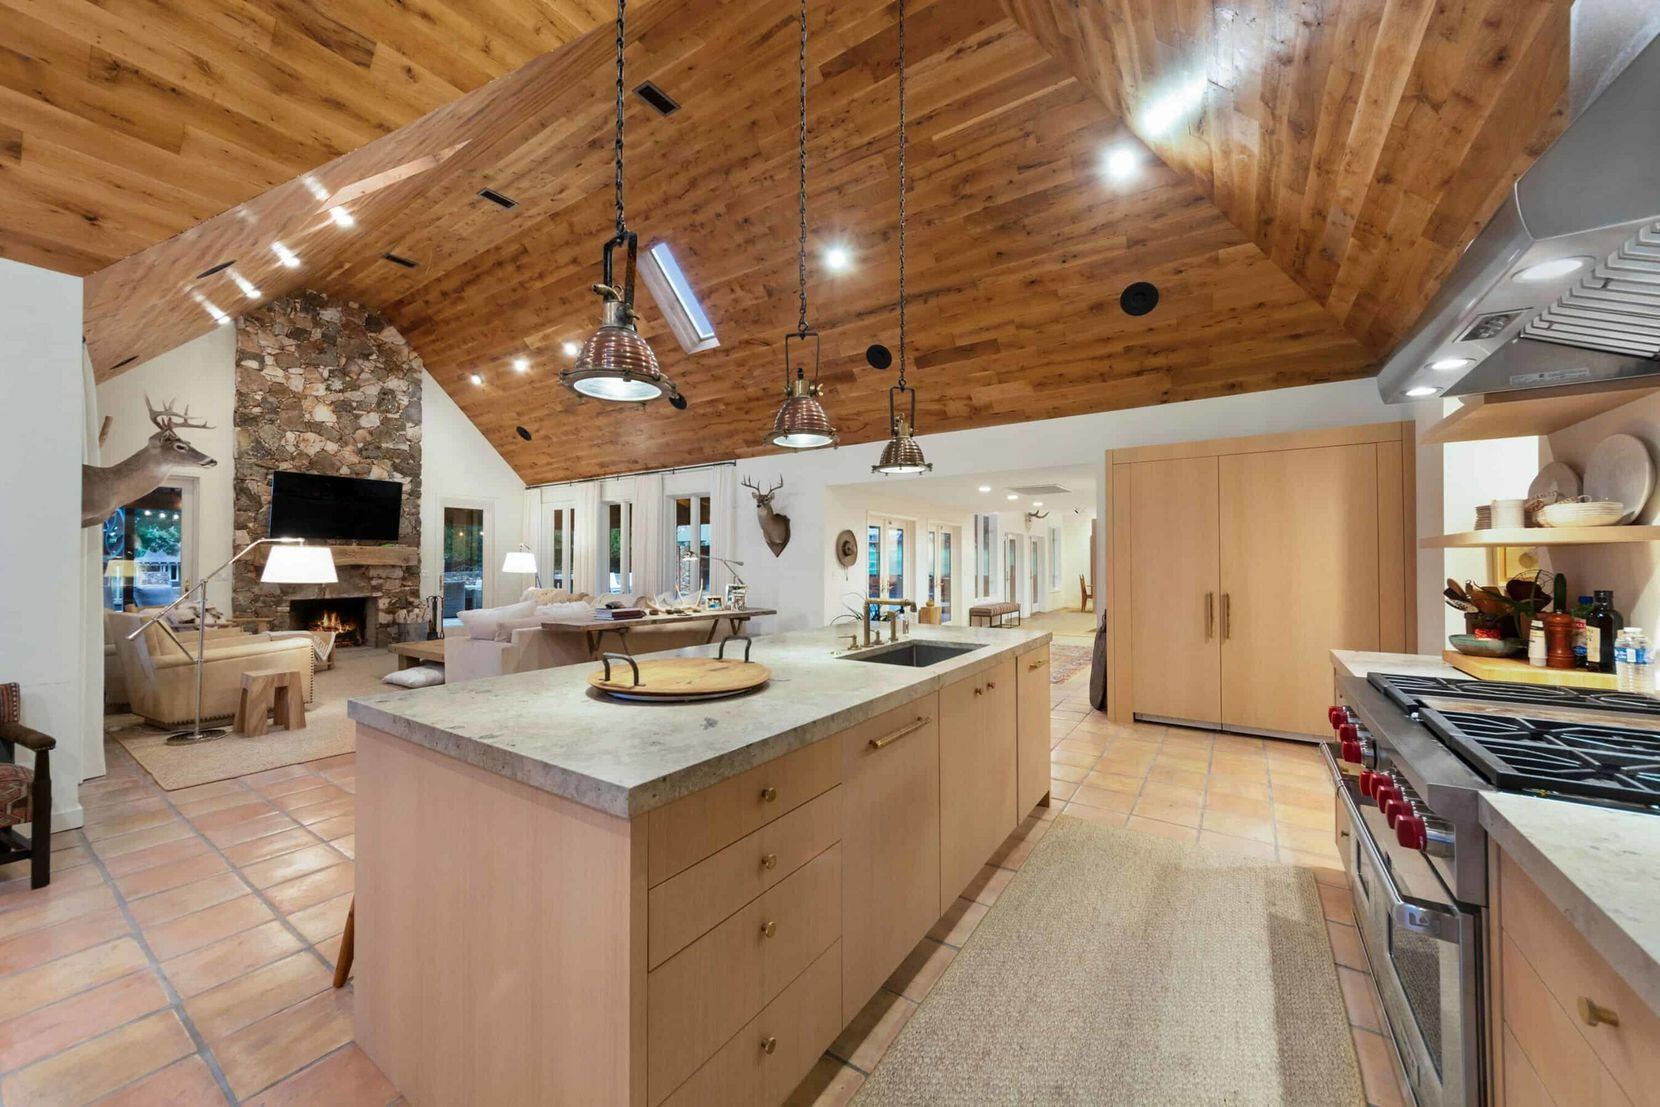 The home on site features vaulted wooden ceilings.